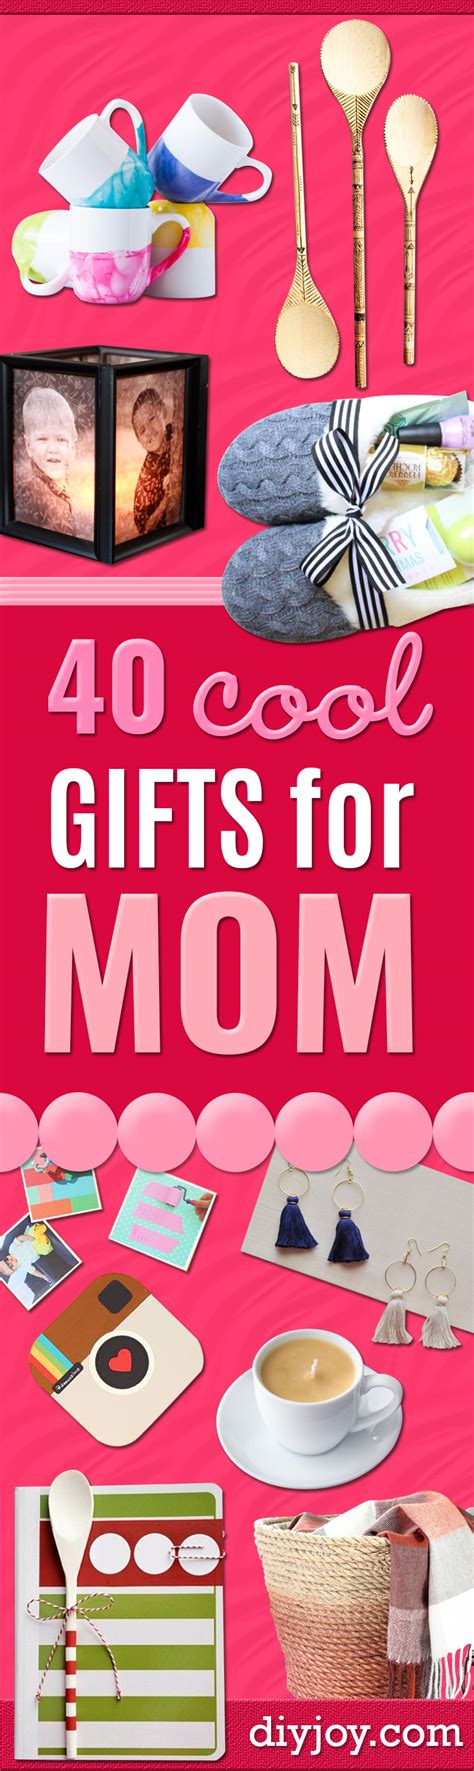 Knowing that their son or daughter took time to actually make something goes much further than simply buying flowers or a new pair of slippers. 40 Coolest Gifts To Make for Mom